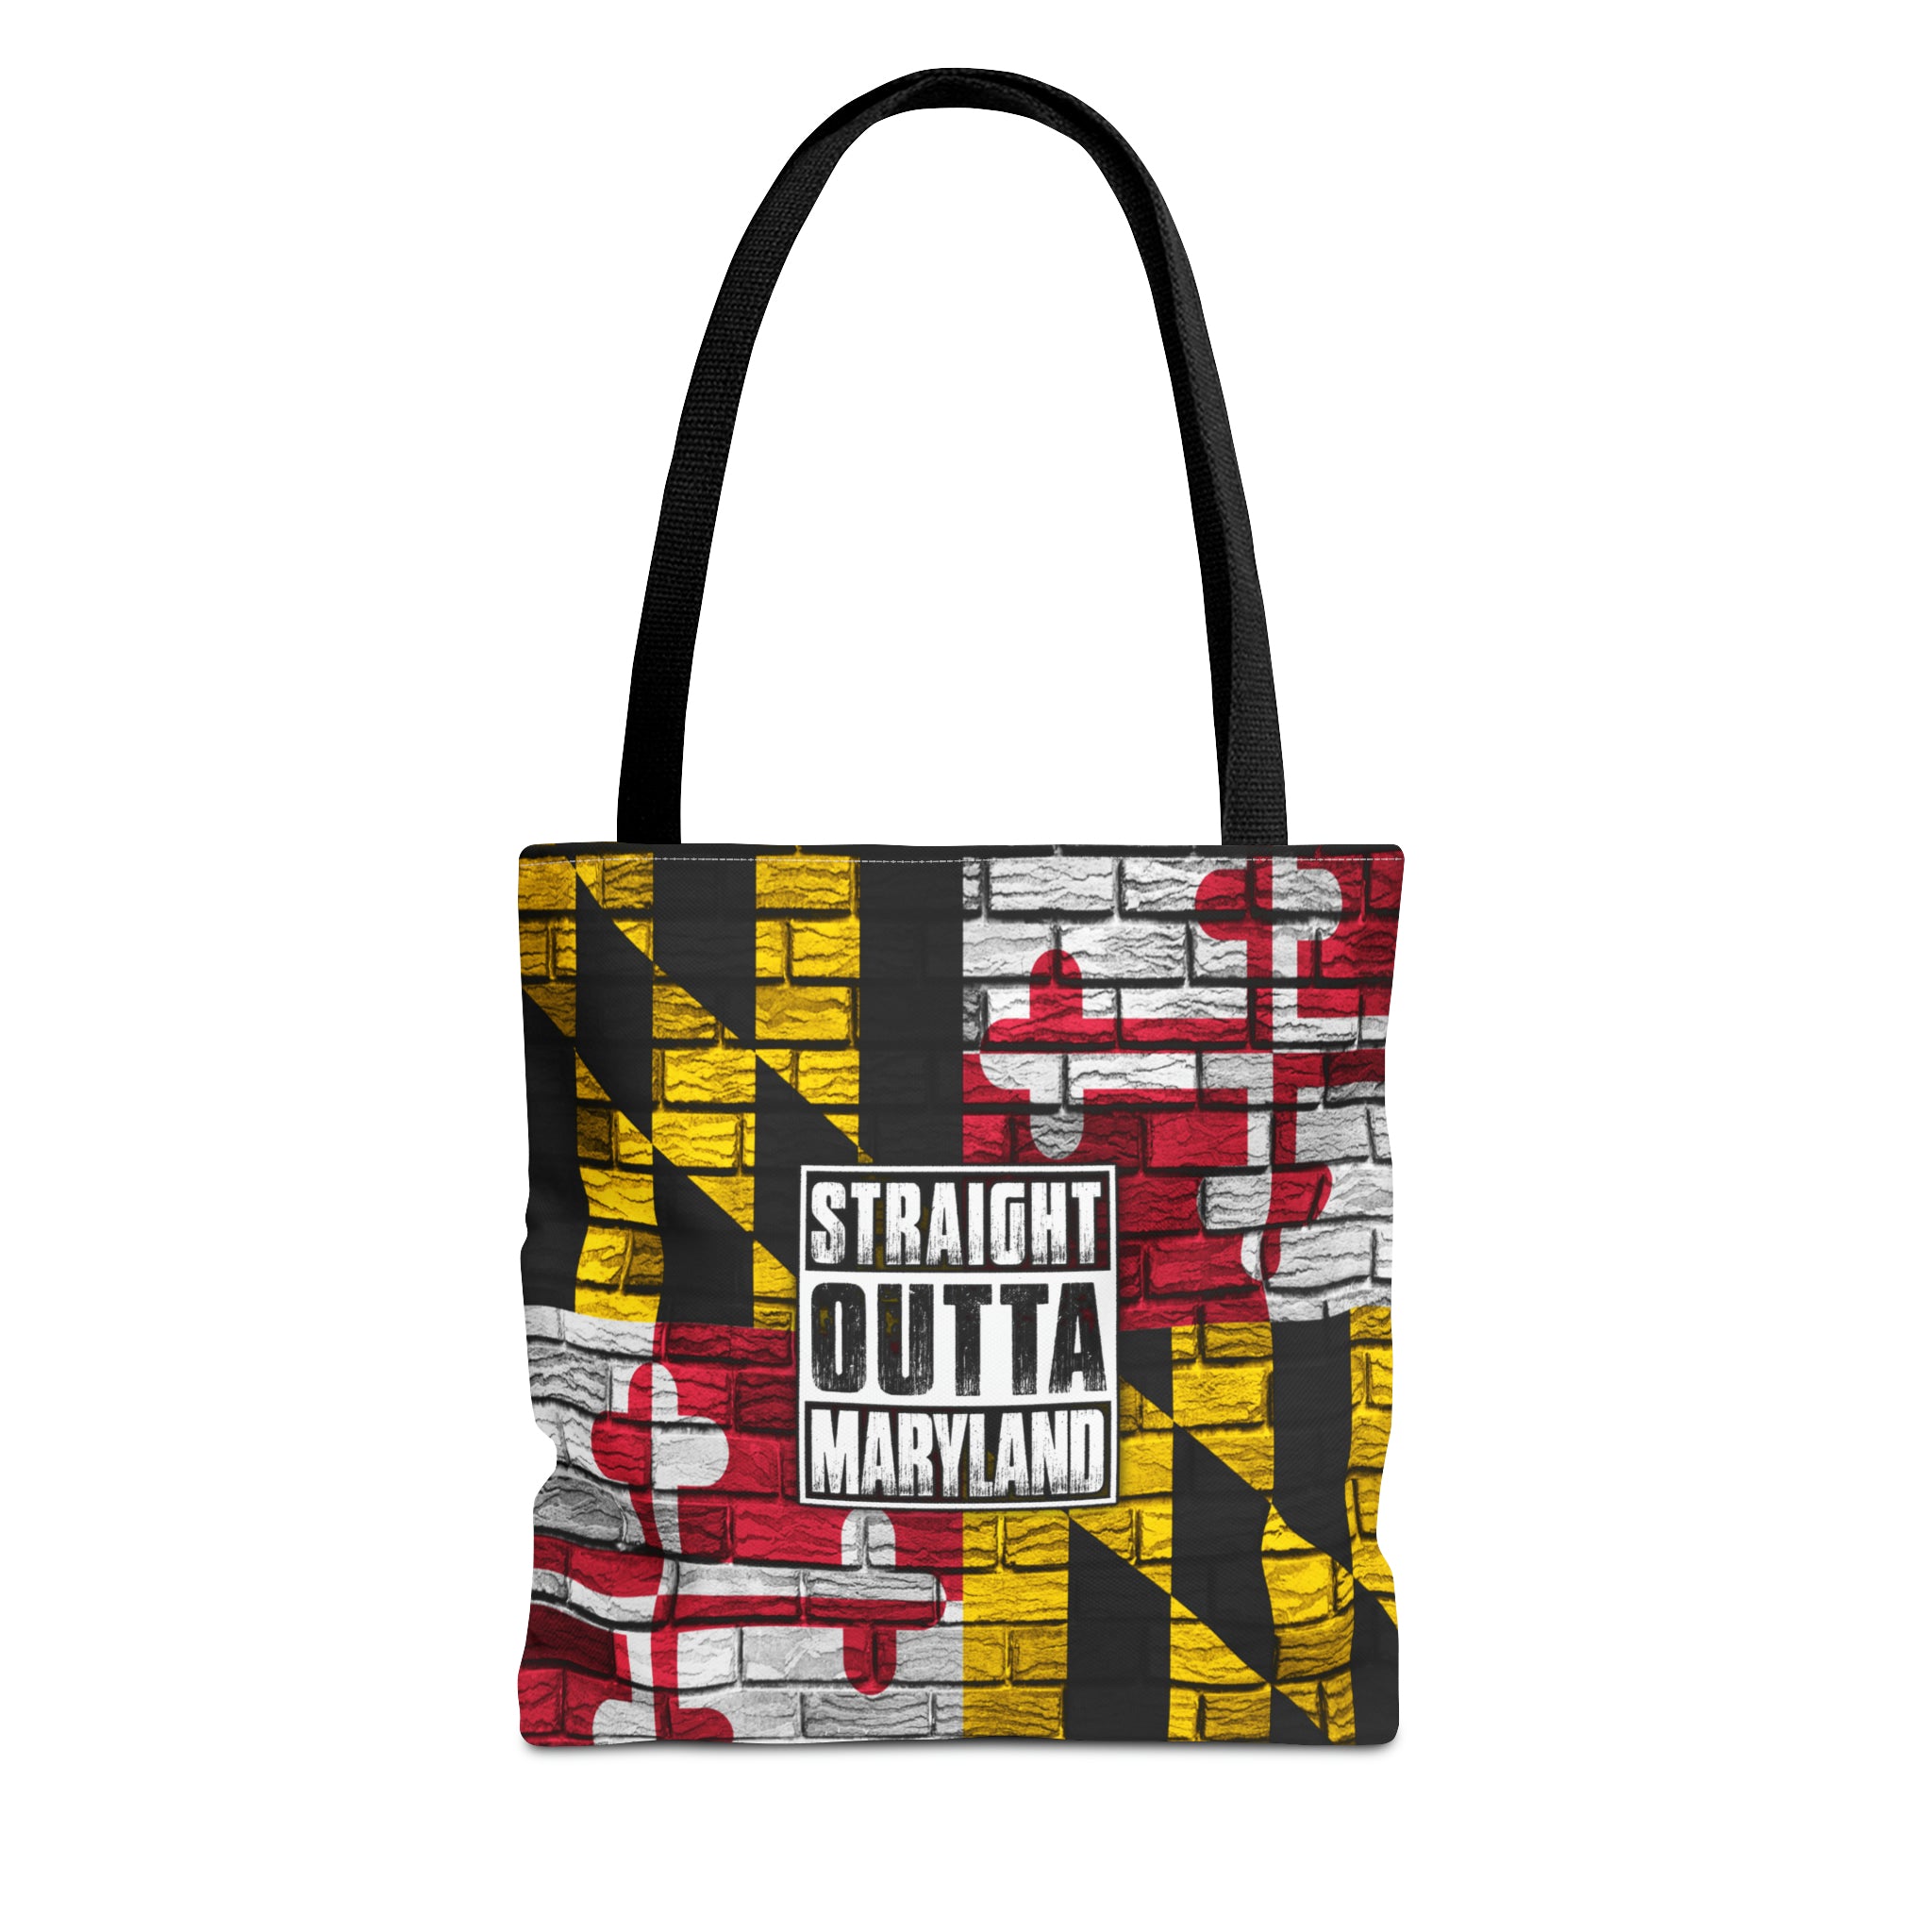 Straight Outta Maryland Shopping Bag | Shopping Tote for Marylanders